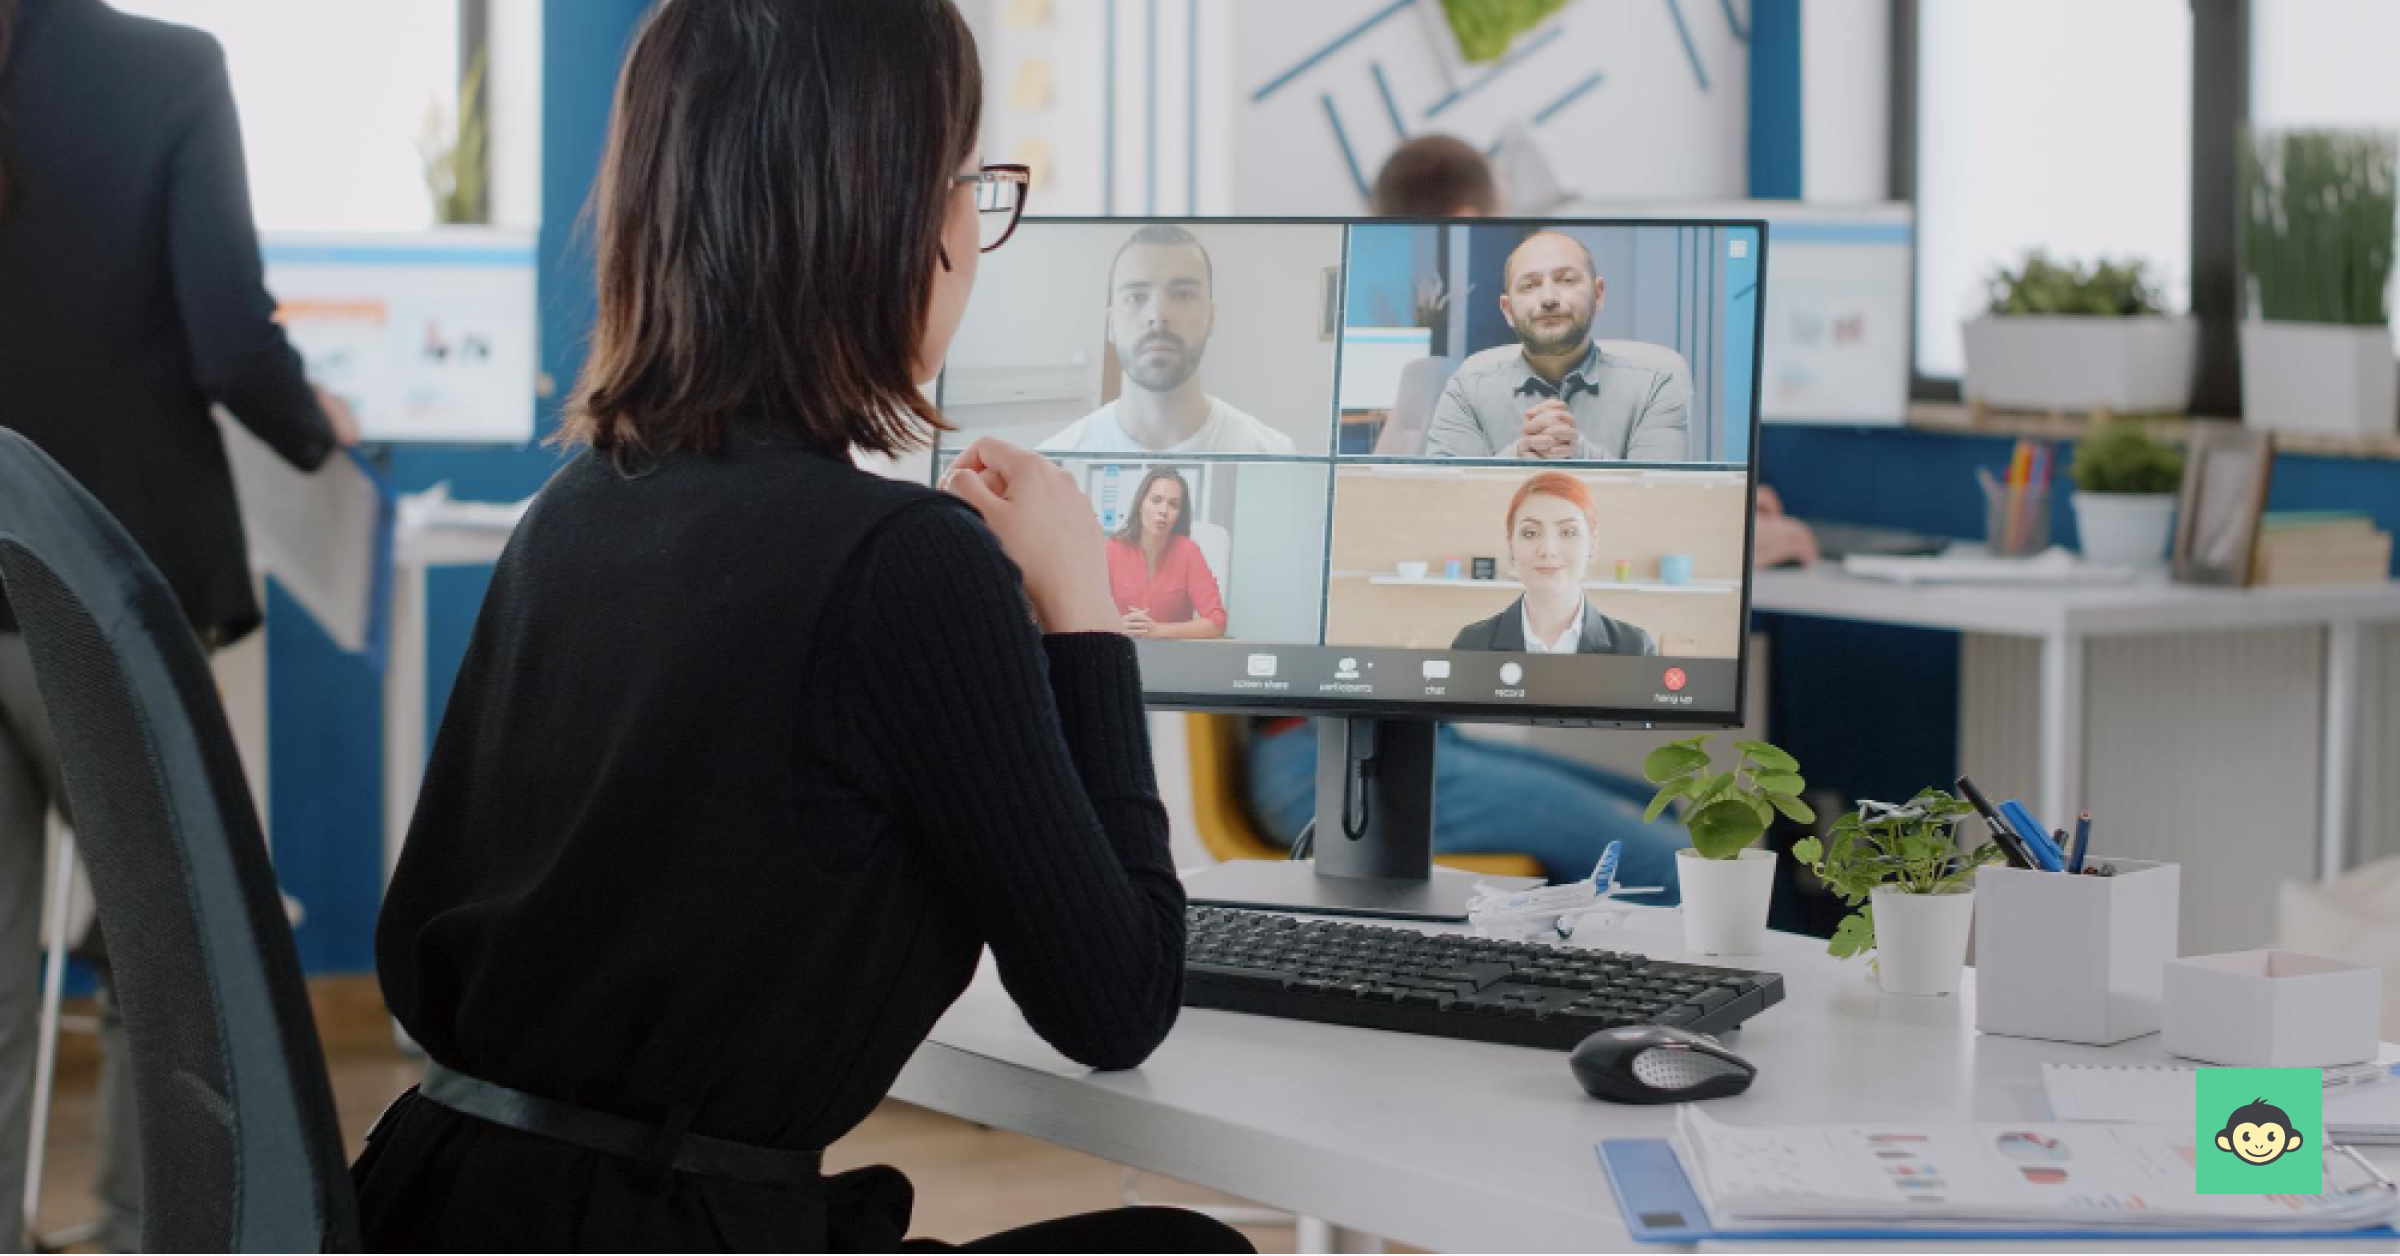 Remote employees are connected together online